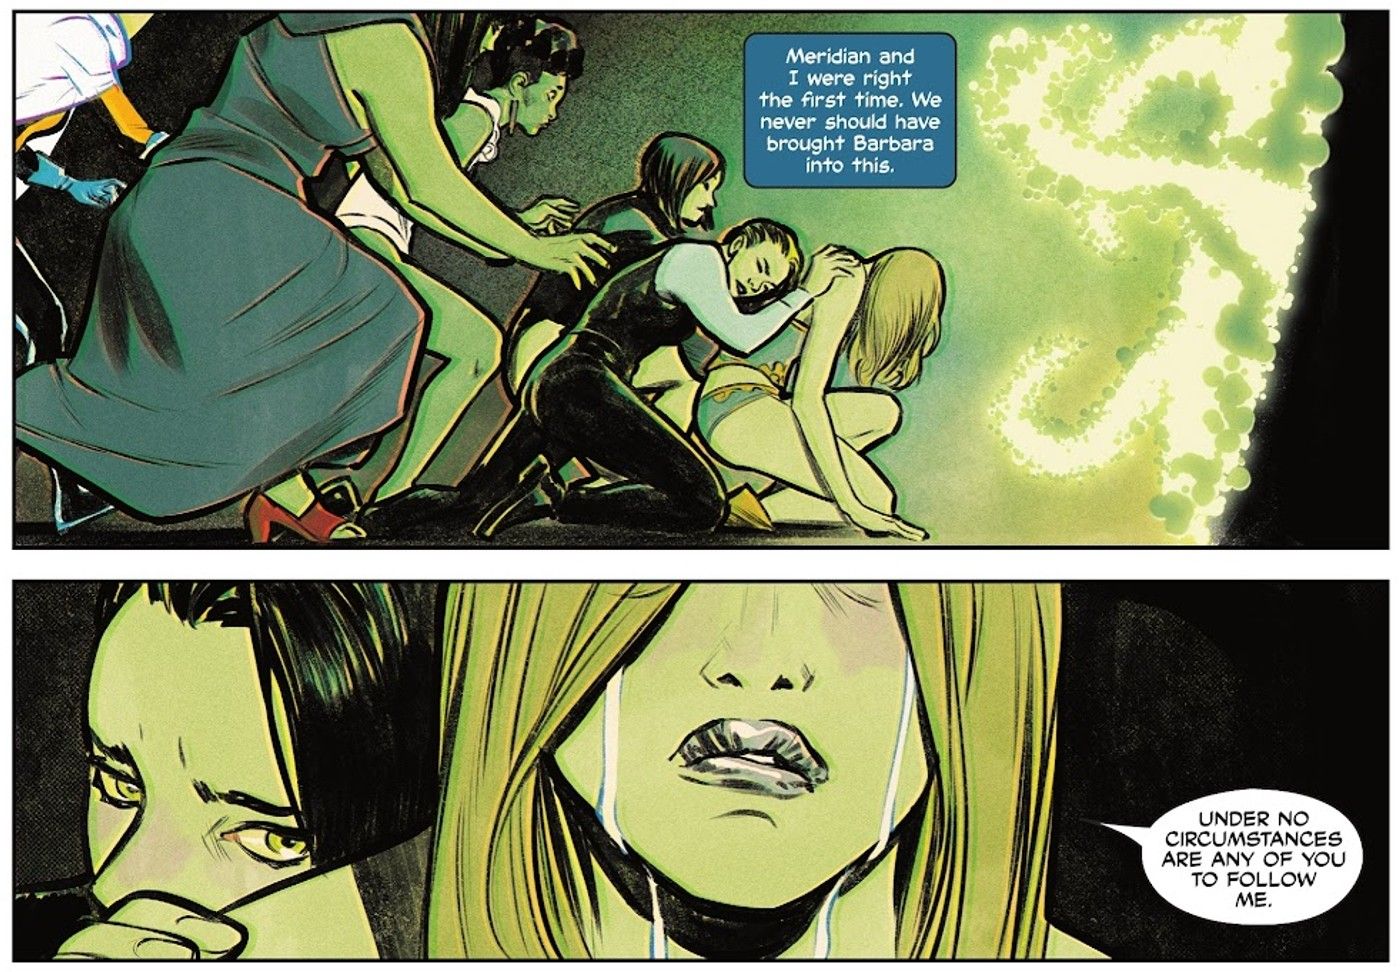 Comic book panels: the Birds of Prey comfort Black Canary as she cries.